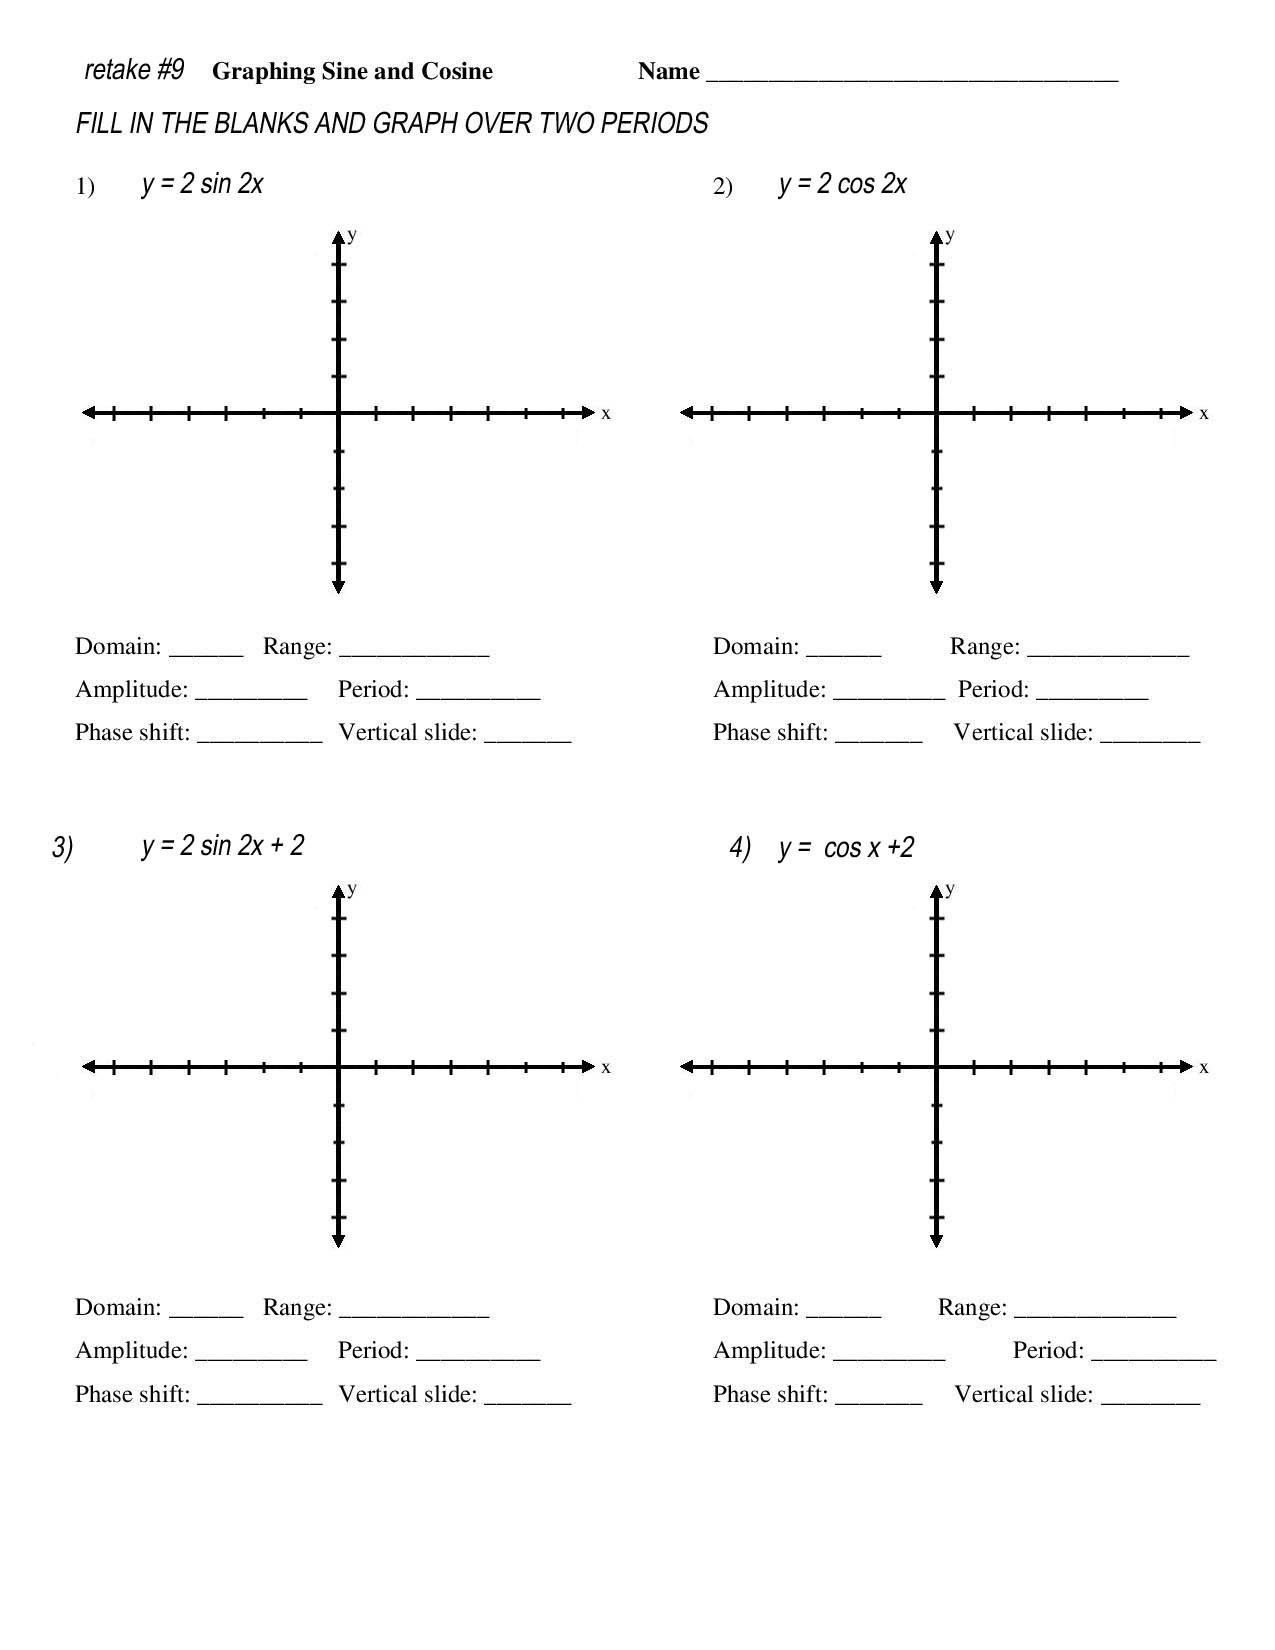 Tr Graphing Sine And Cosine Practice Worksheet 2019 Inverse